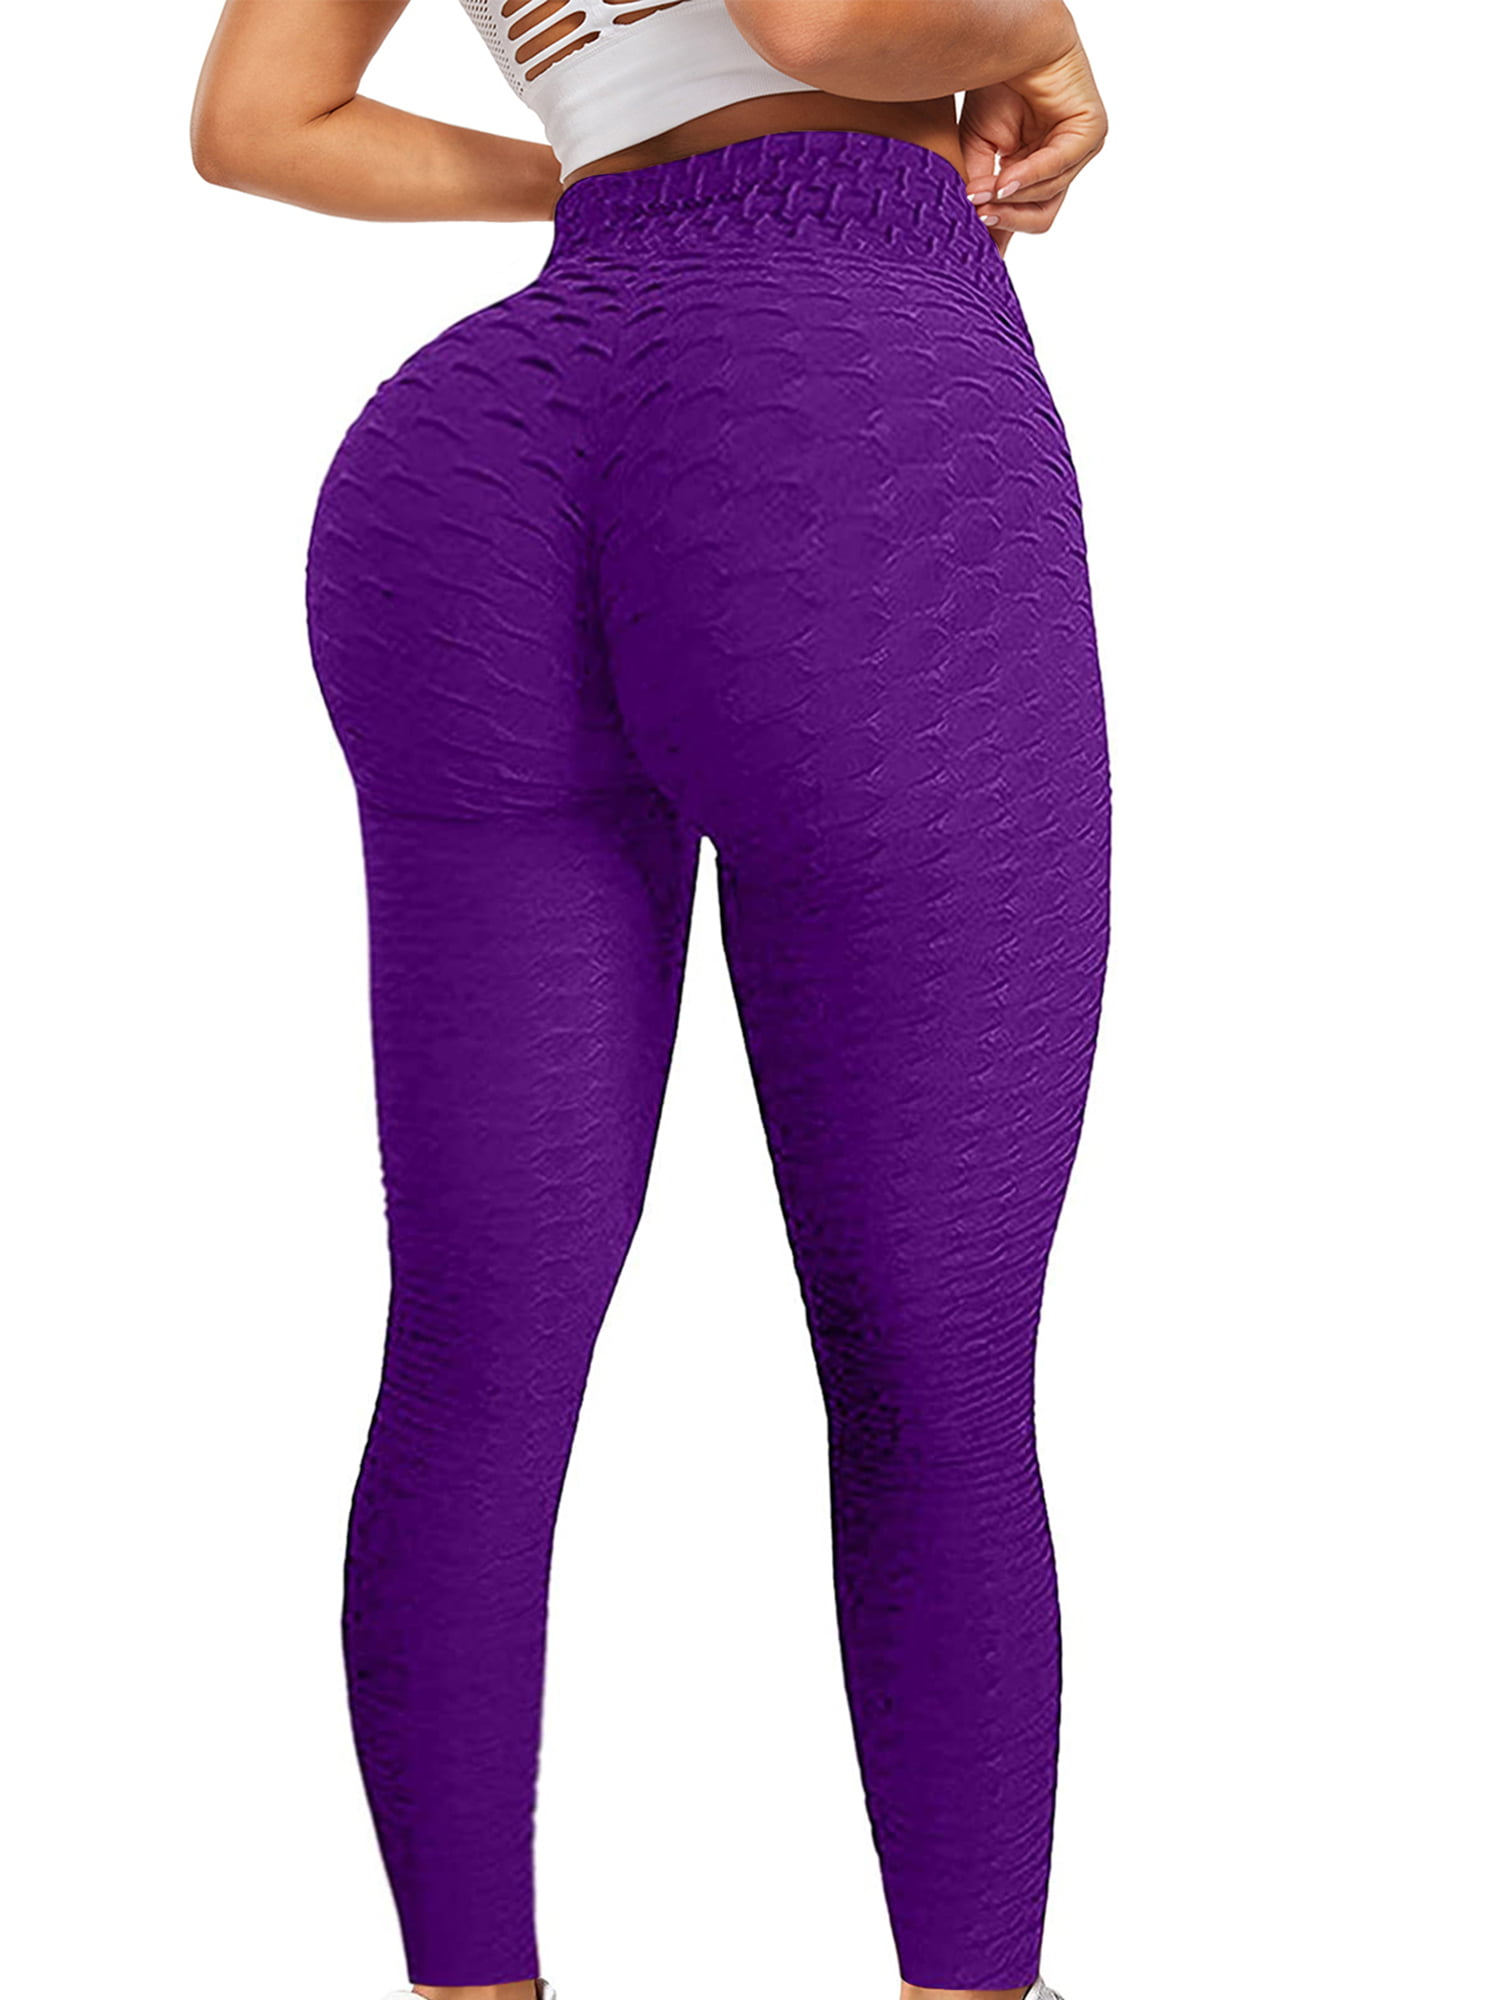 Leggings for Women High Waisted Yoga Pants Butt Lifting Anti Cellulite  Leggings Booty Tights Non See-Through Pants (Purple-04#, L)